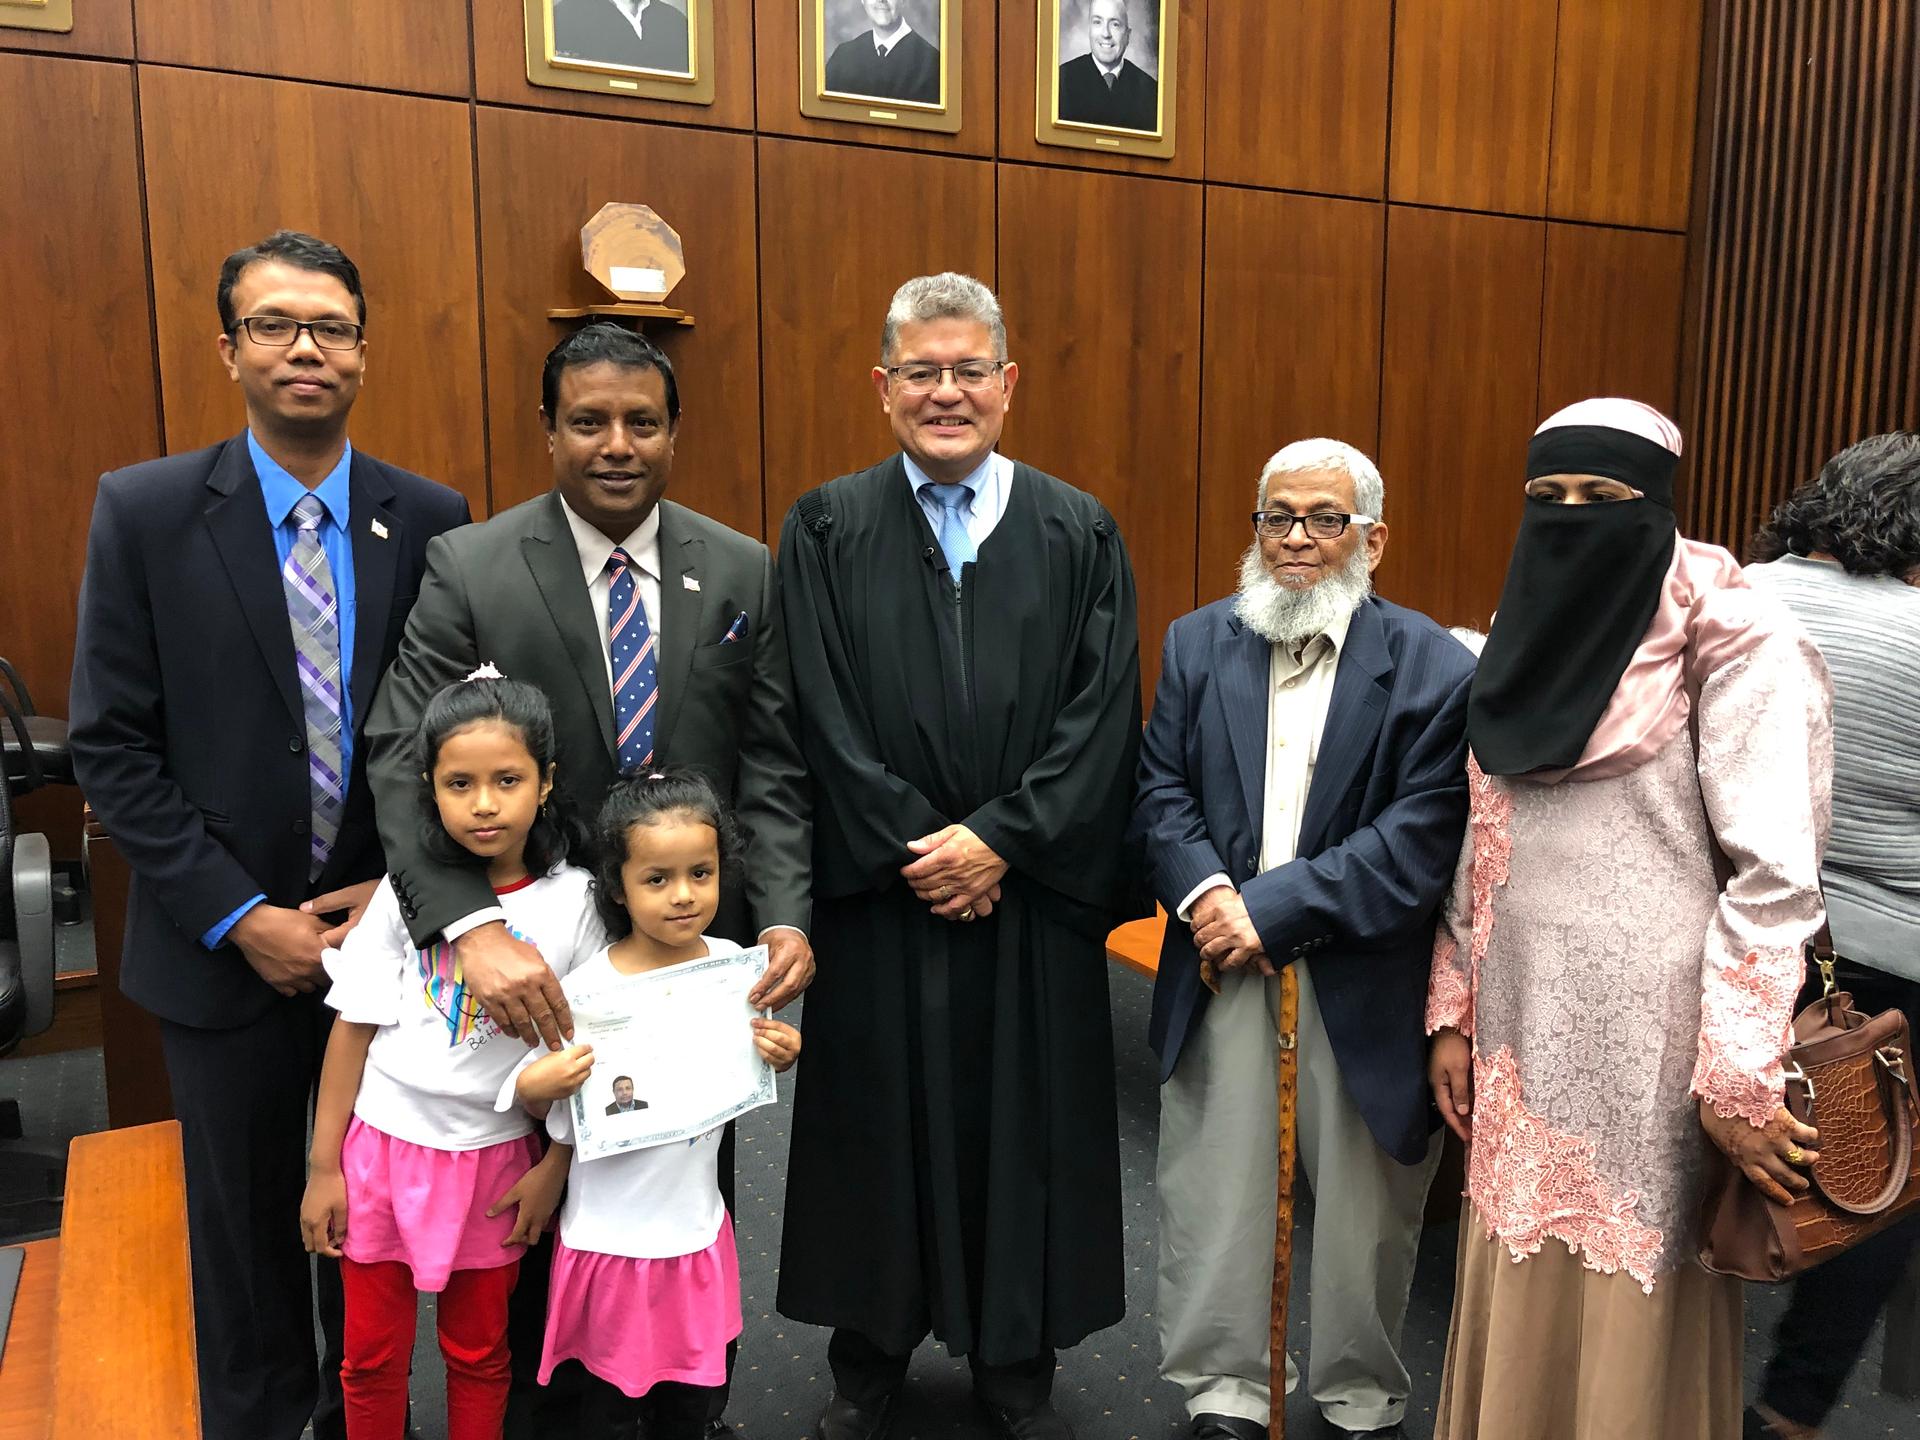 A man stands alongside a judge and his family at his naturalization ceremony.